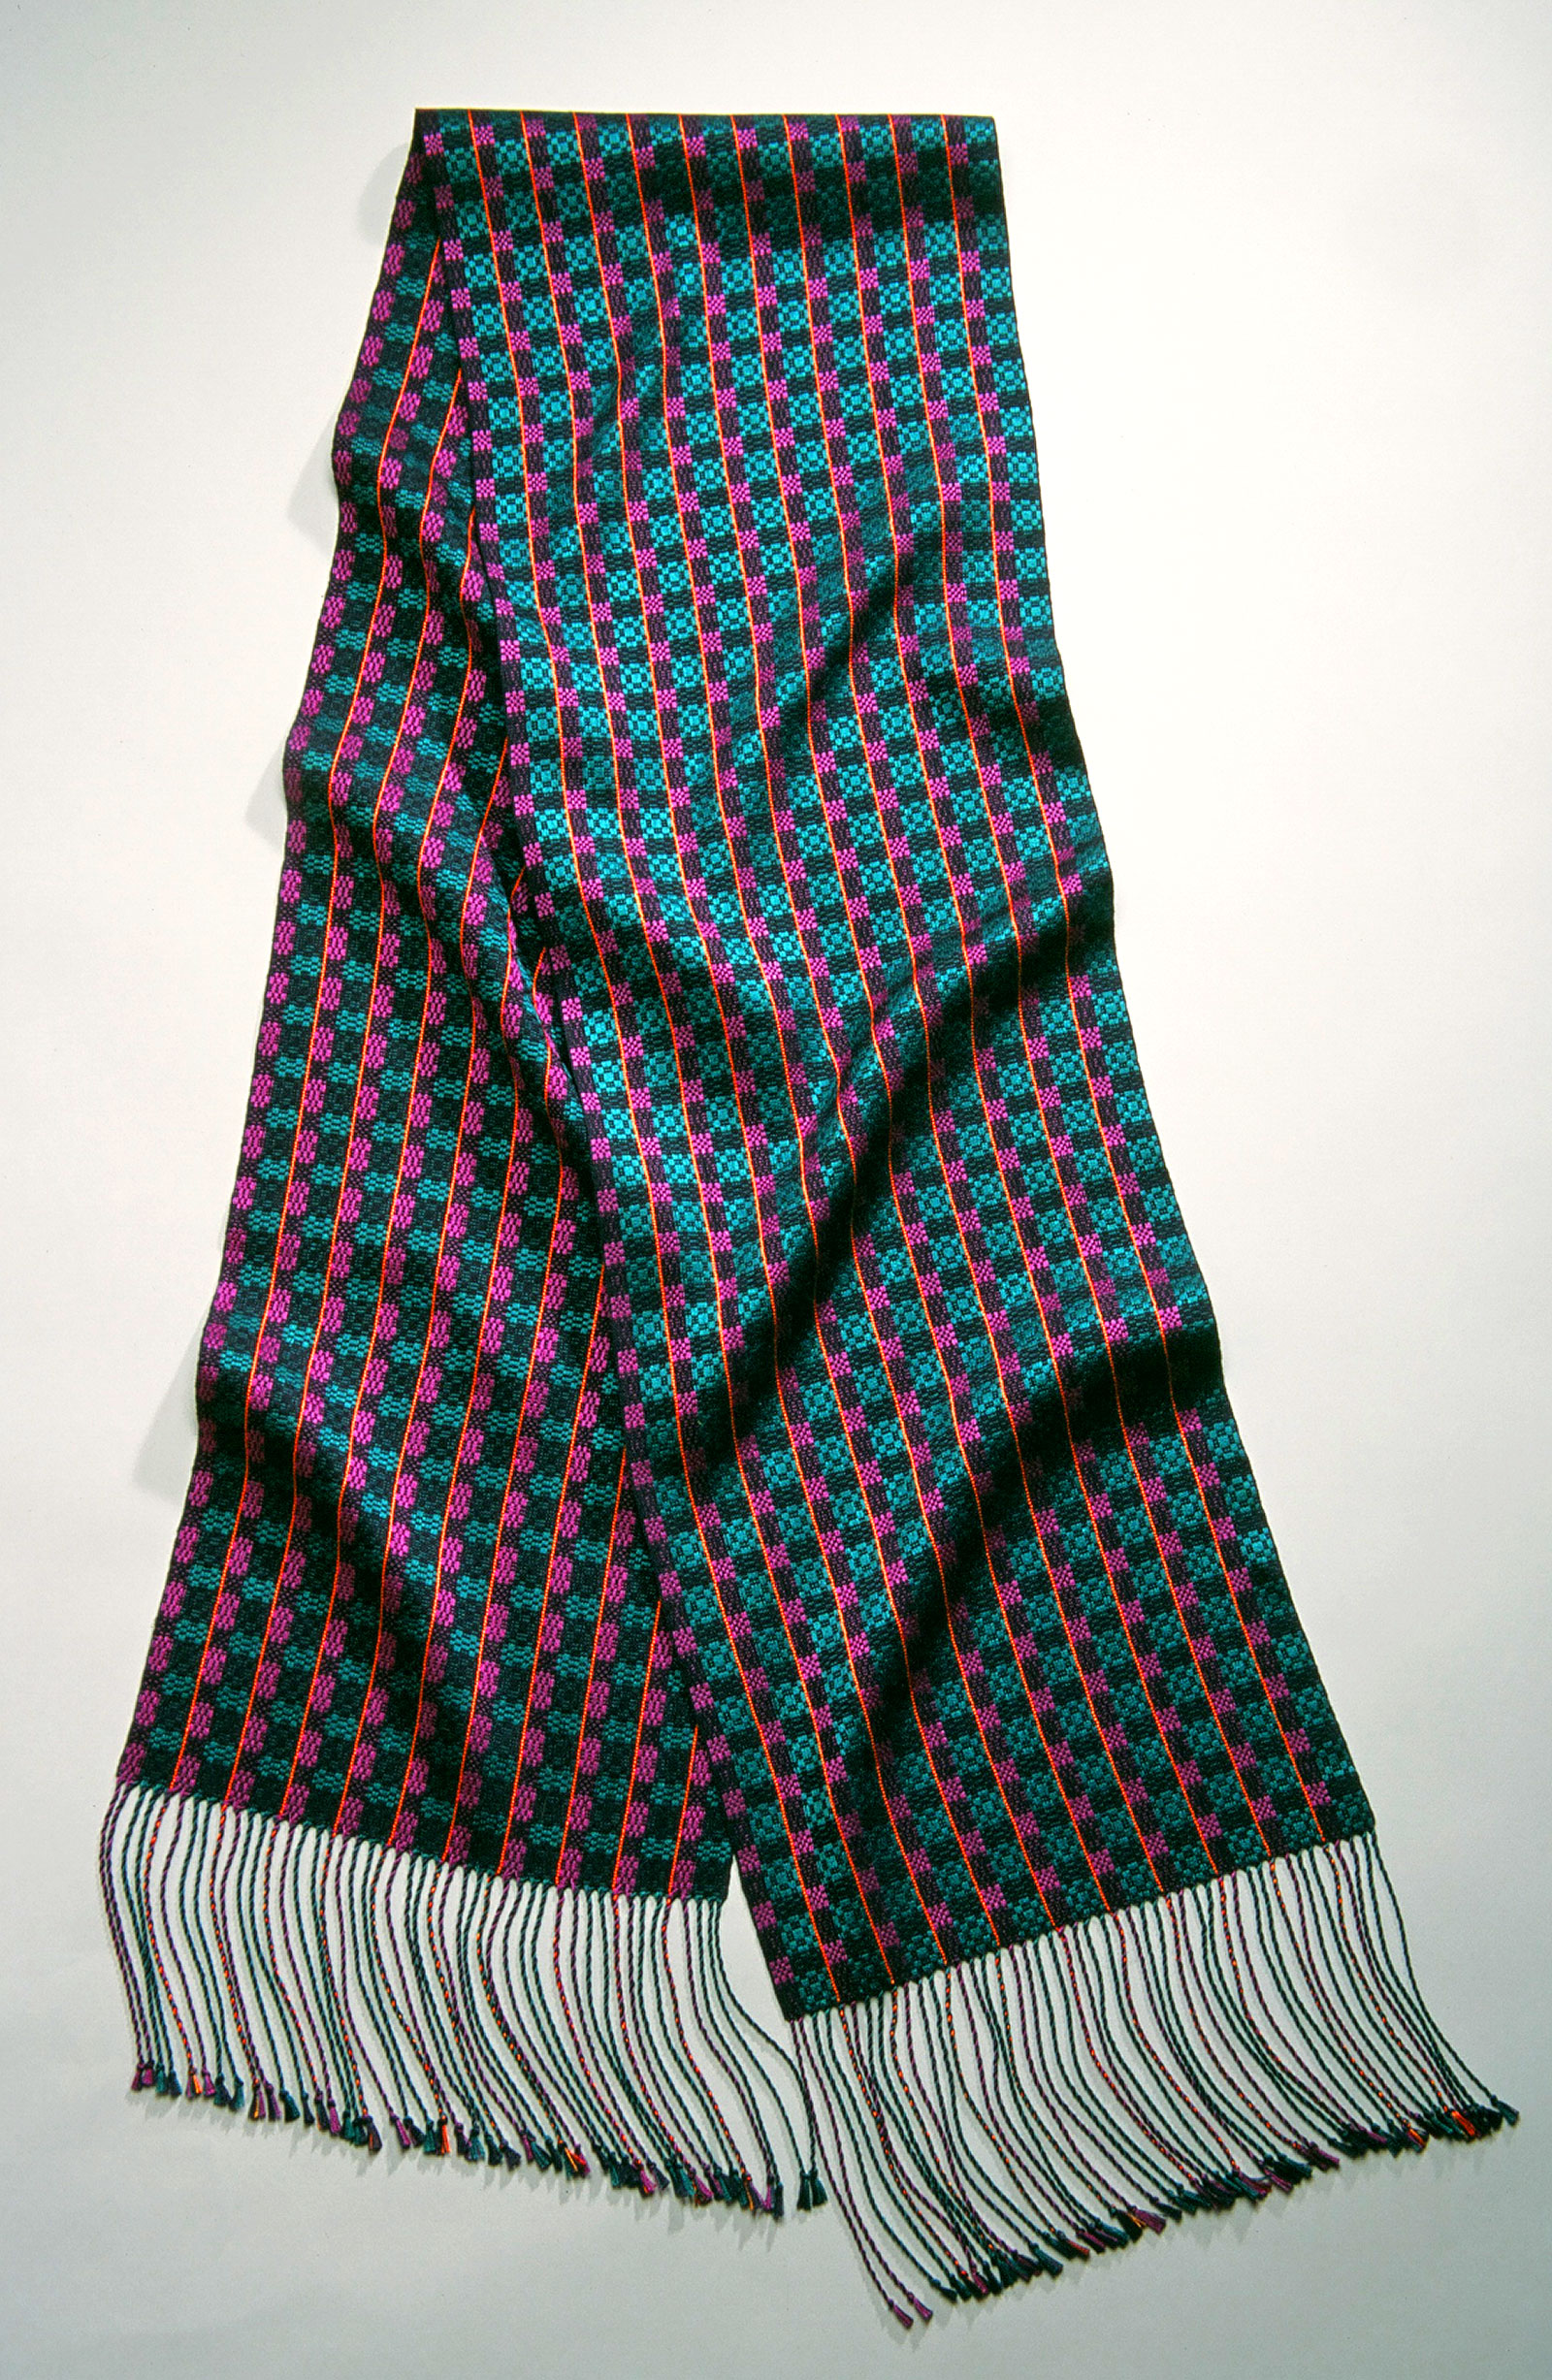 TESSELLATION Scarf by Barbara J. Walker - Photography by Brian McLernon